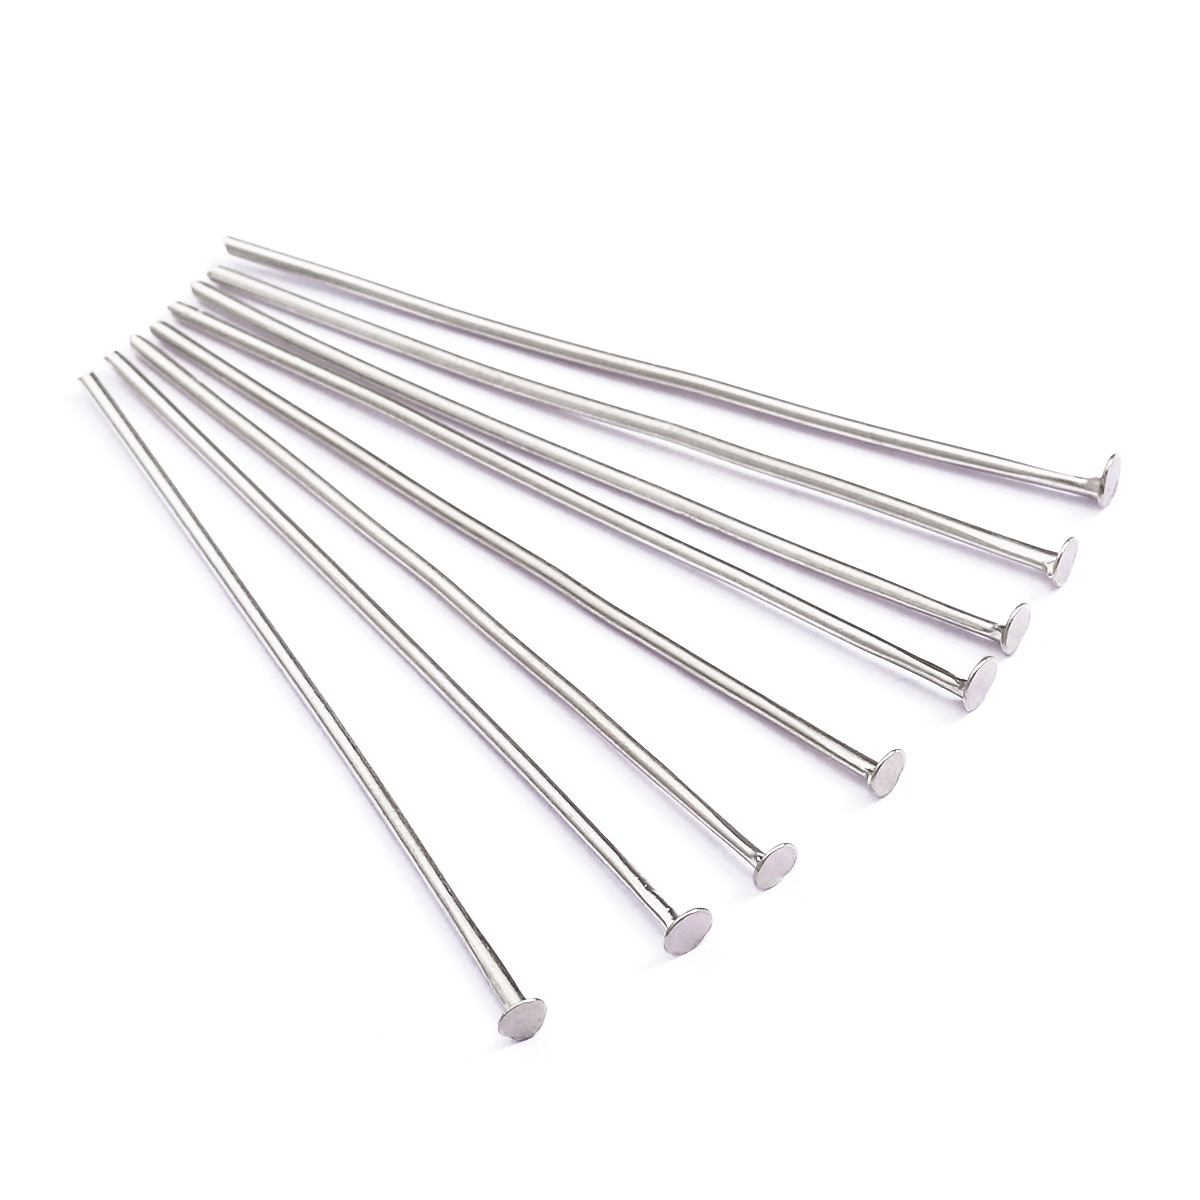 Silver 30 mm, About 70 sticks a pack